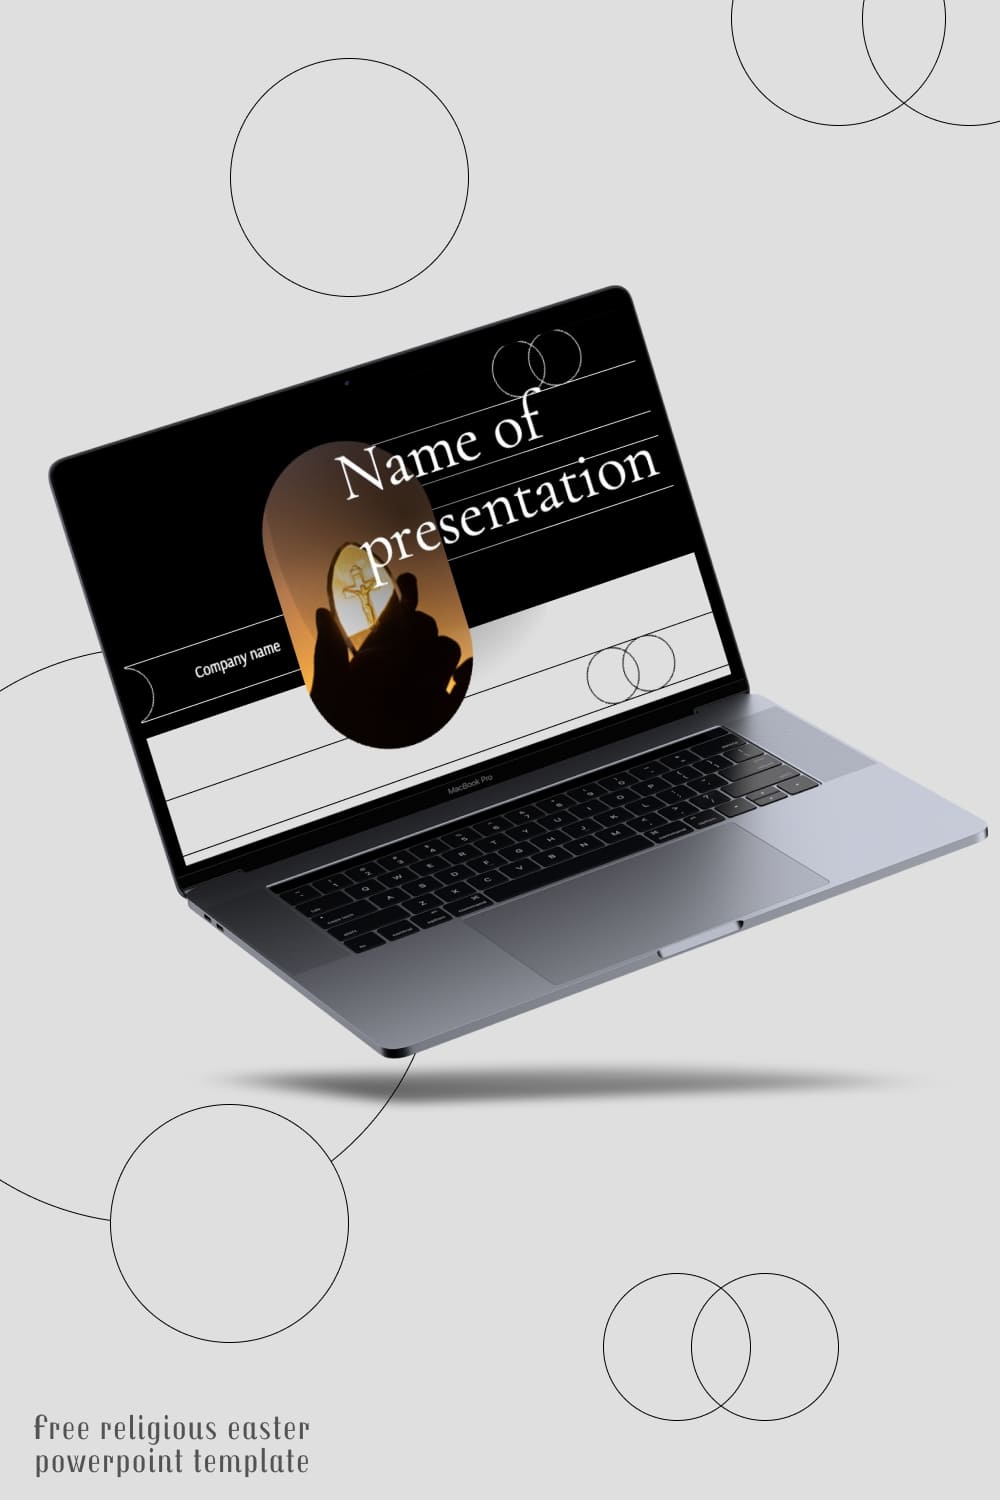 Free Religious Easter Powerpoint Template Pinterest.